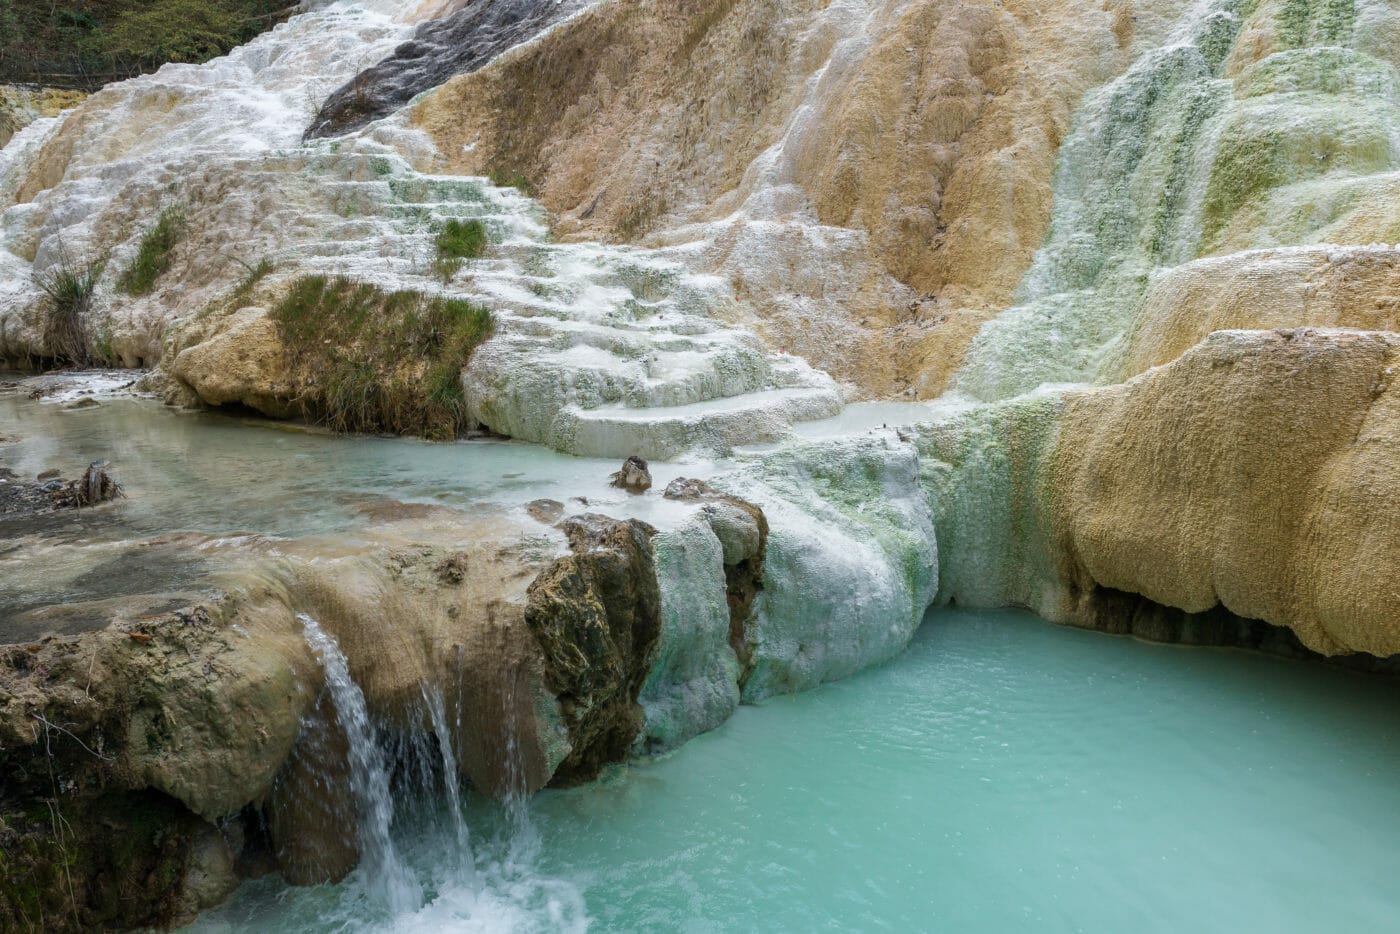 The milky turquoise pools of Bagni di San Filippo in Tuscany